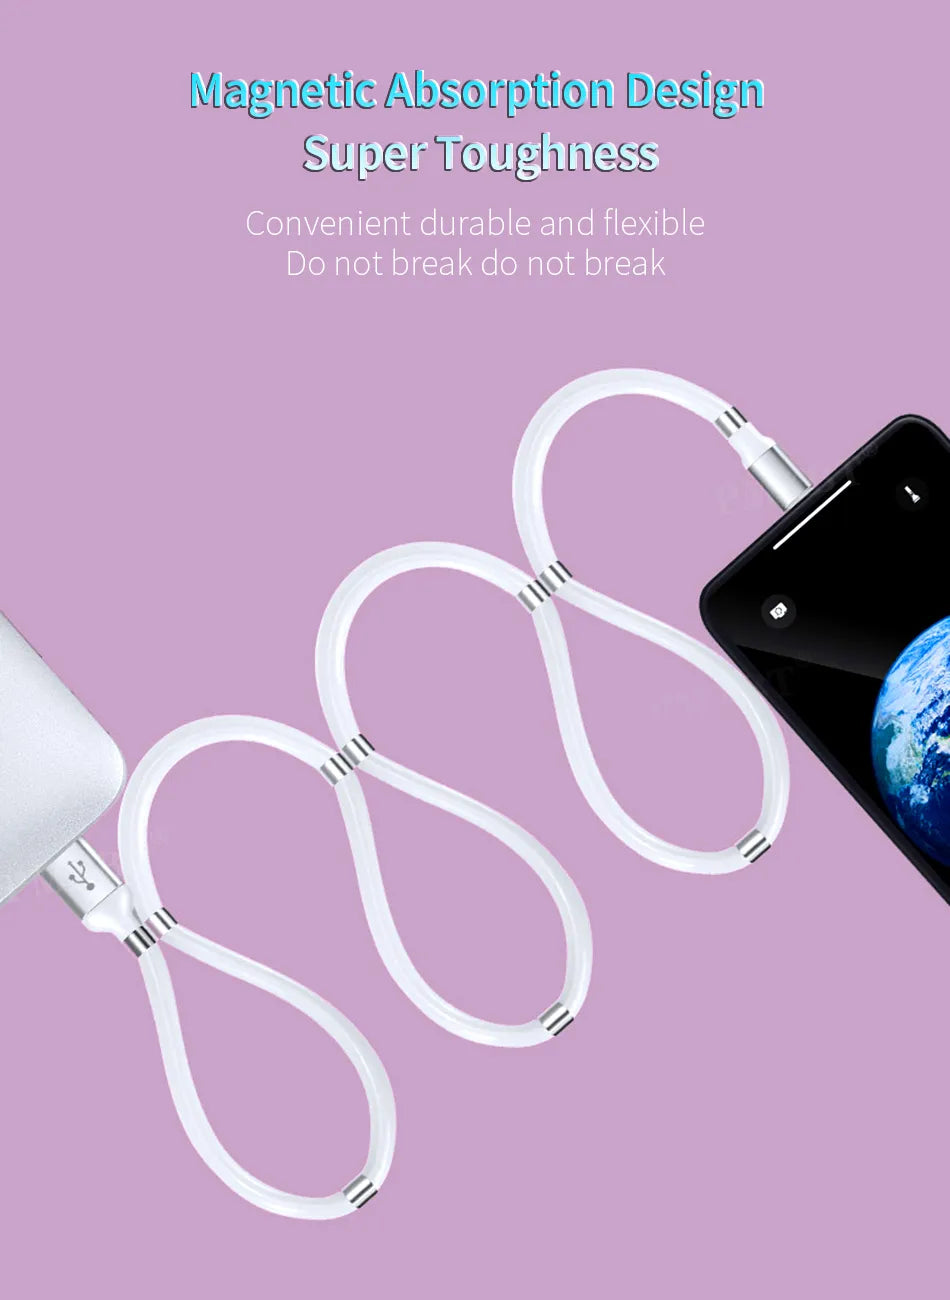 🔥LAST DAY SPECIAL SALE 60% OFF 🔥Magnetic Charging Cable